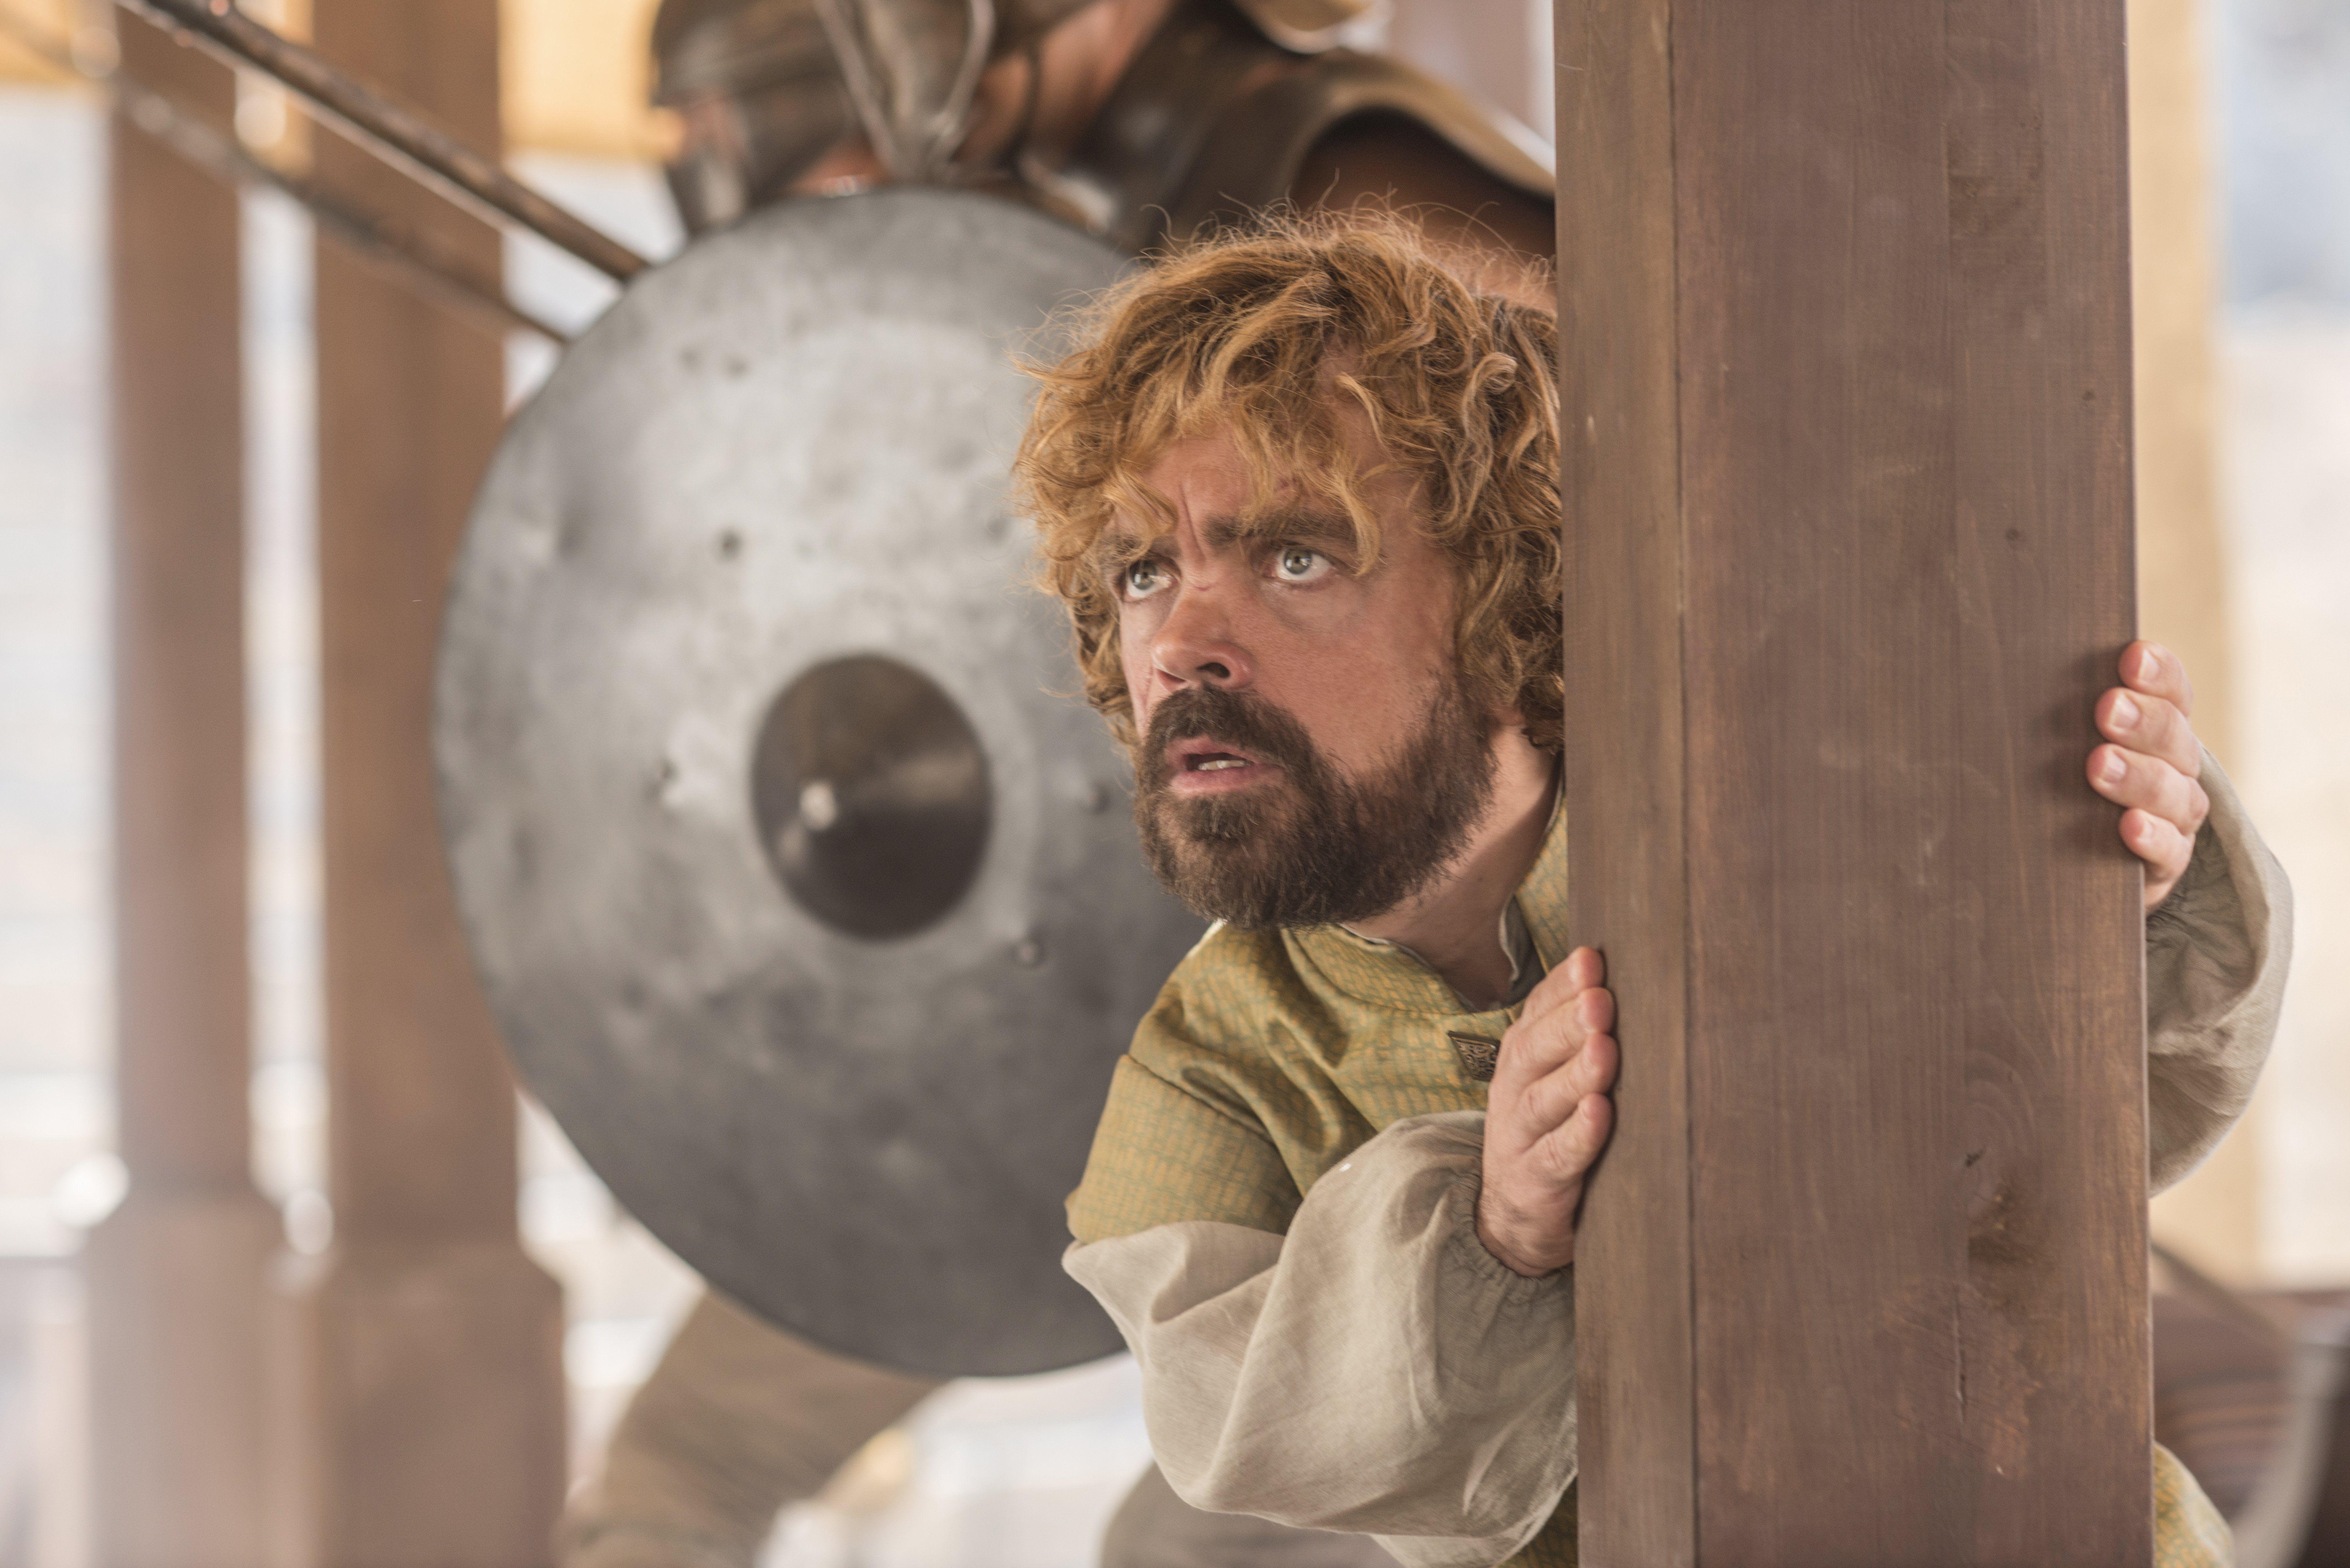 Download 7360x4912 Game Of Thrones, Tyrion Lannister, Peter Dinklage